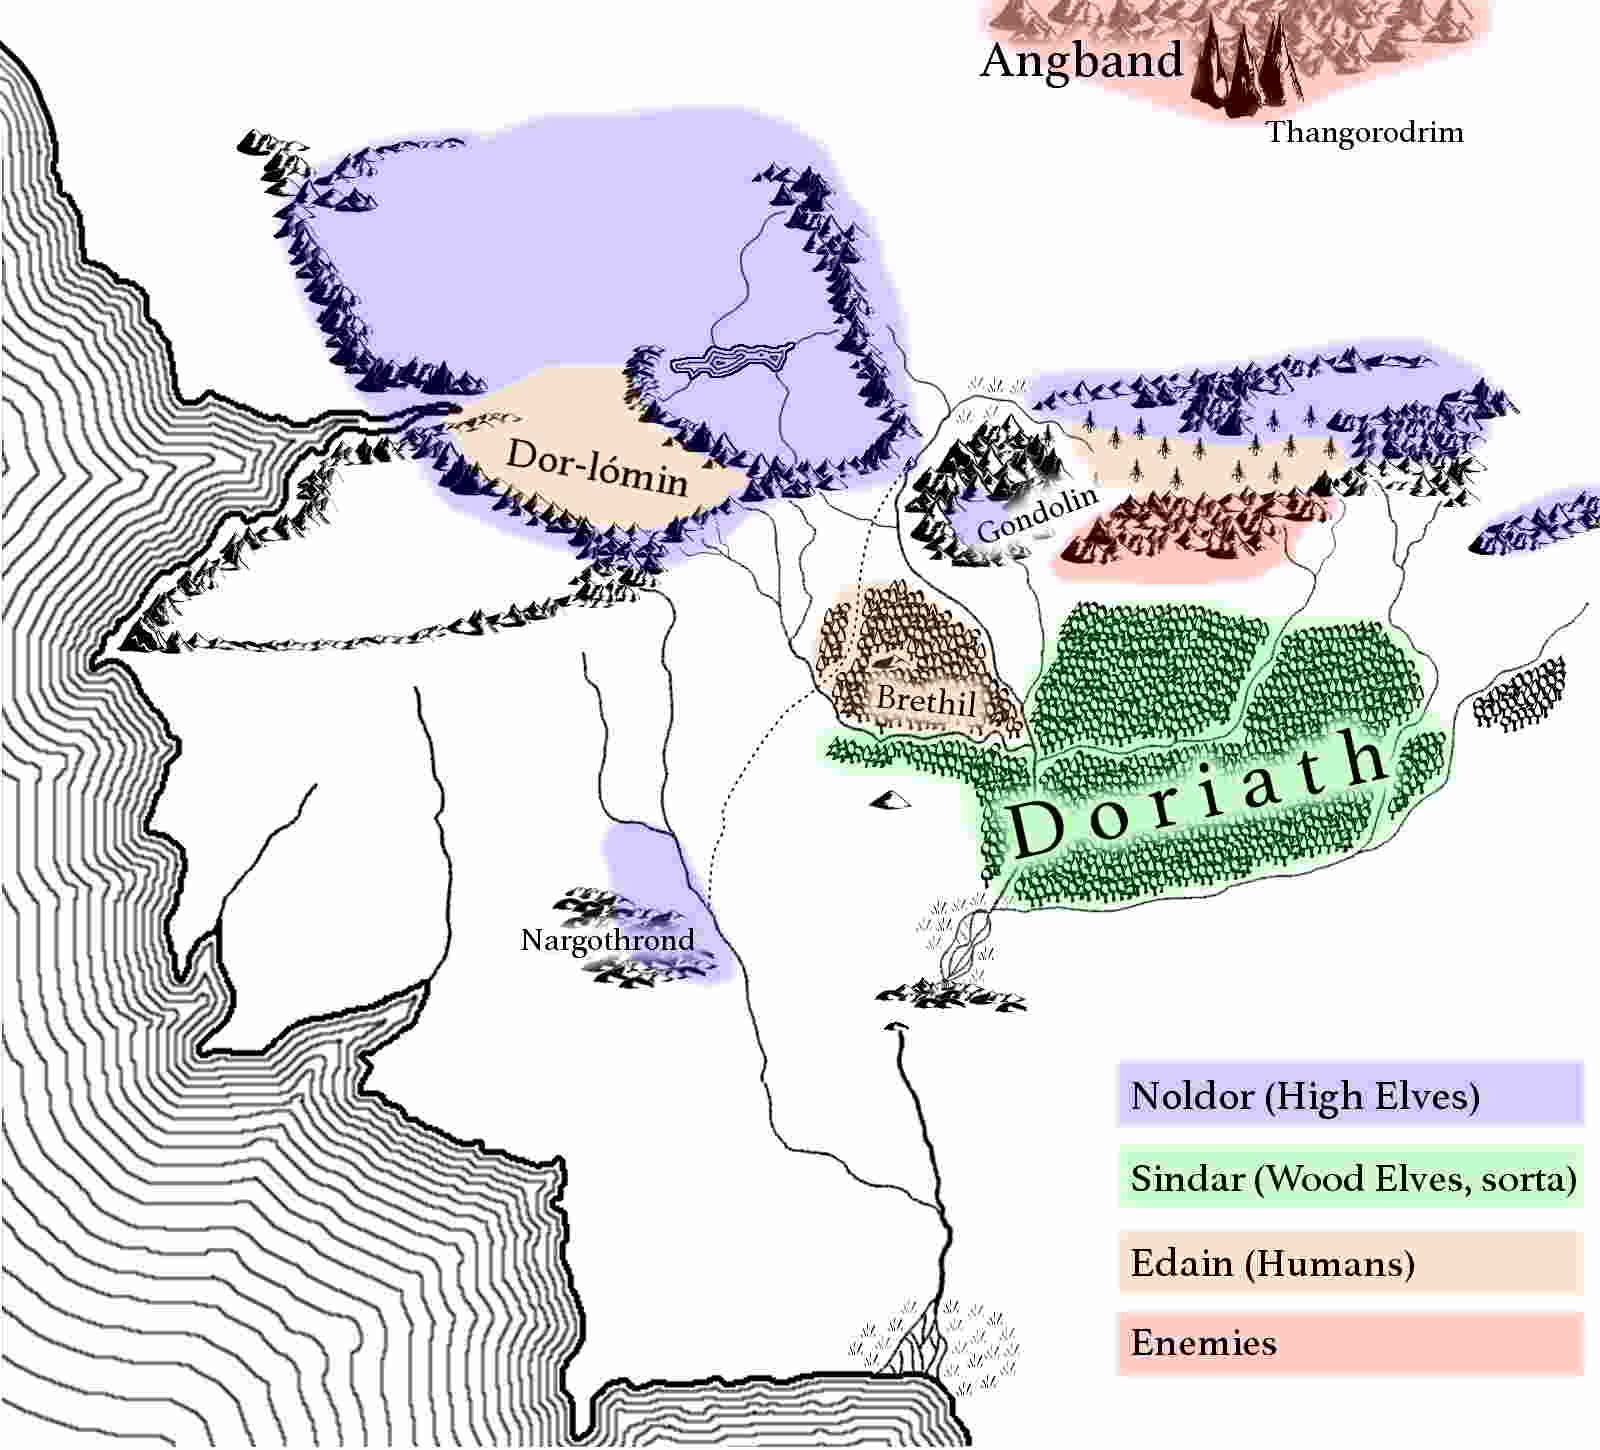 A simplified version of the Children of Hurin map.